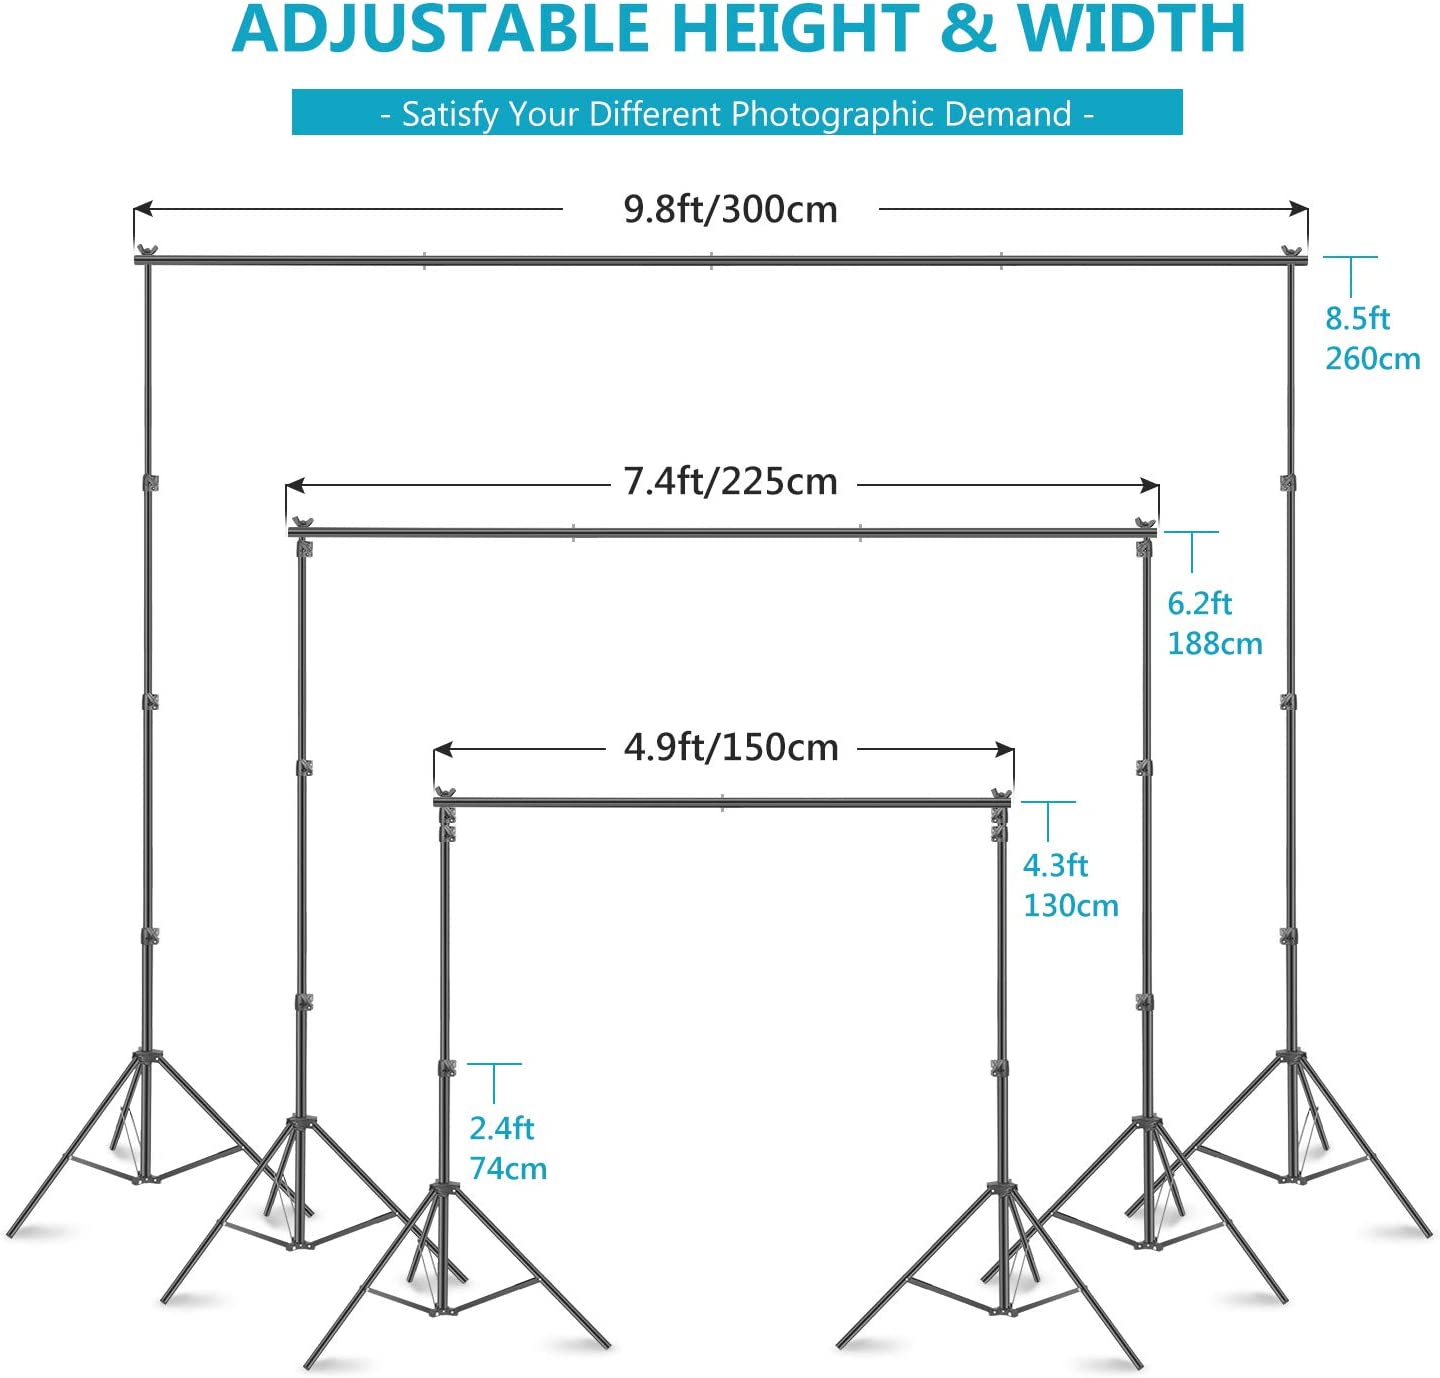 Neewer 8.5x10ft Background Support System Complete Photography Lighting Kit